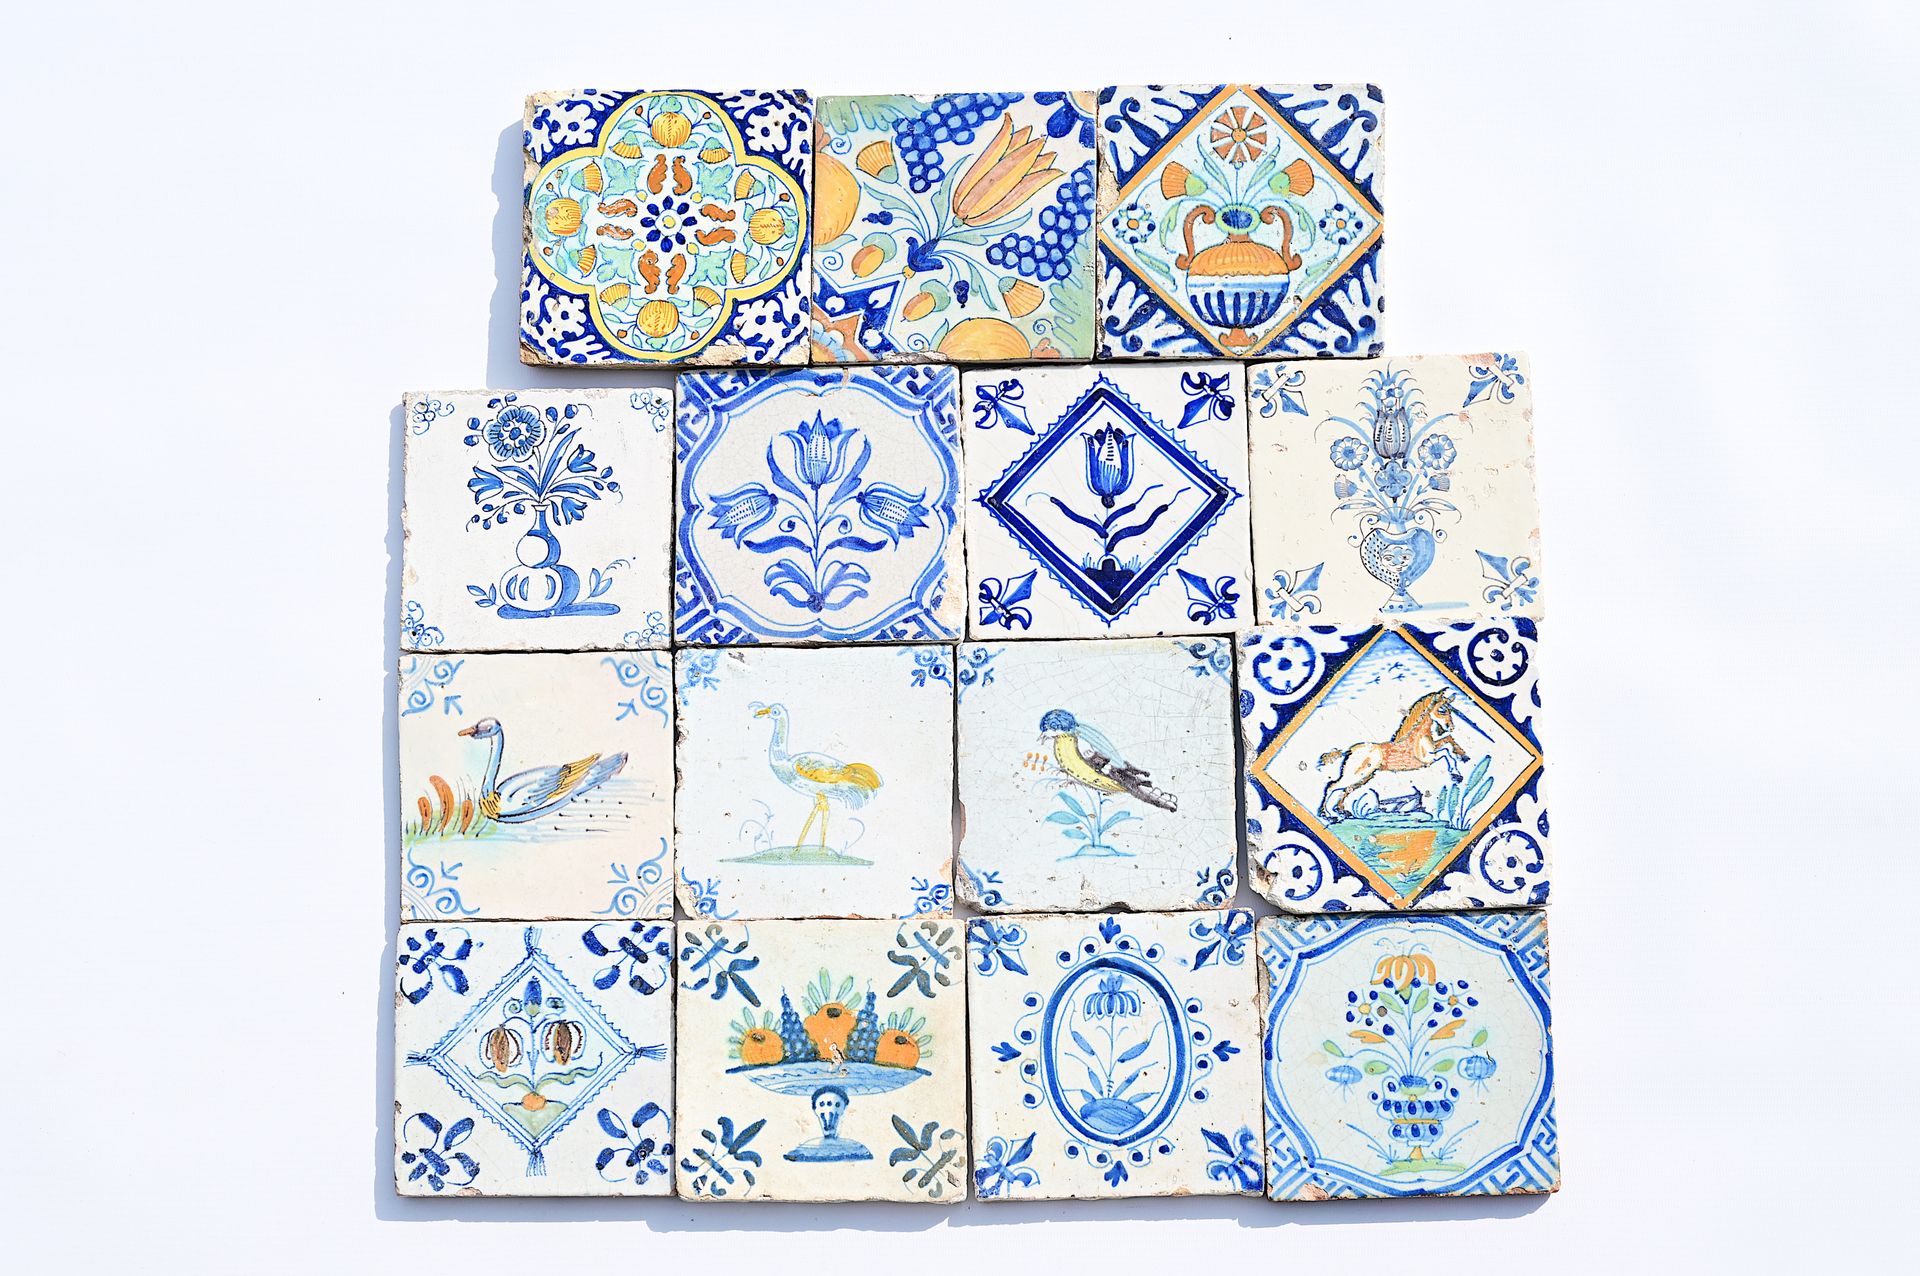 Seventeen blue and white and polychrome Dutch Delft tiles, 17th C. Dix-sept carr&hellip;